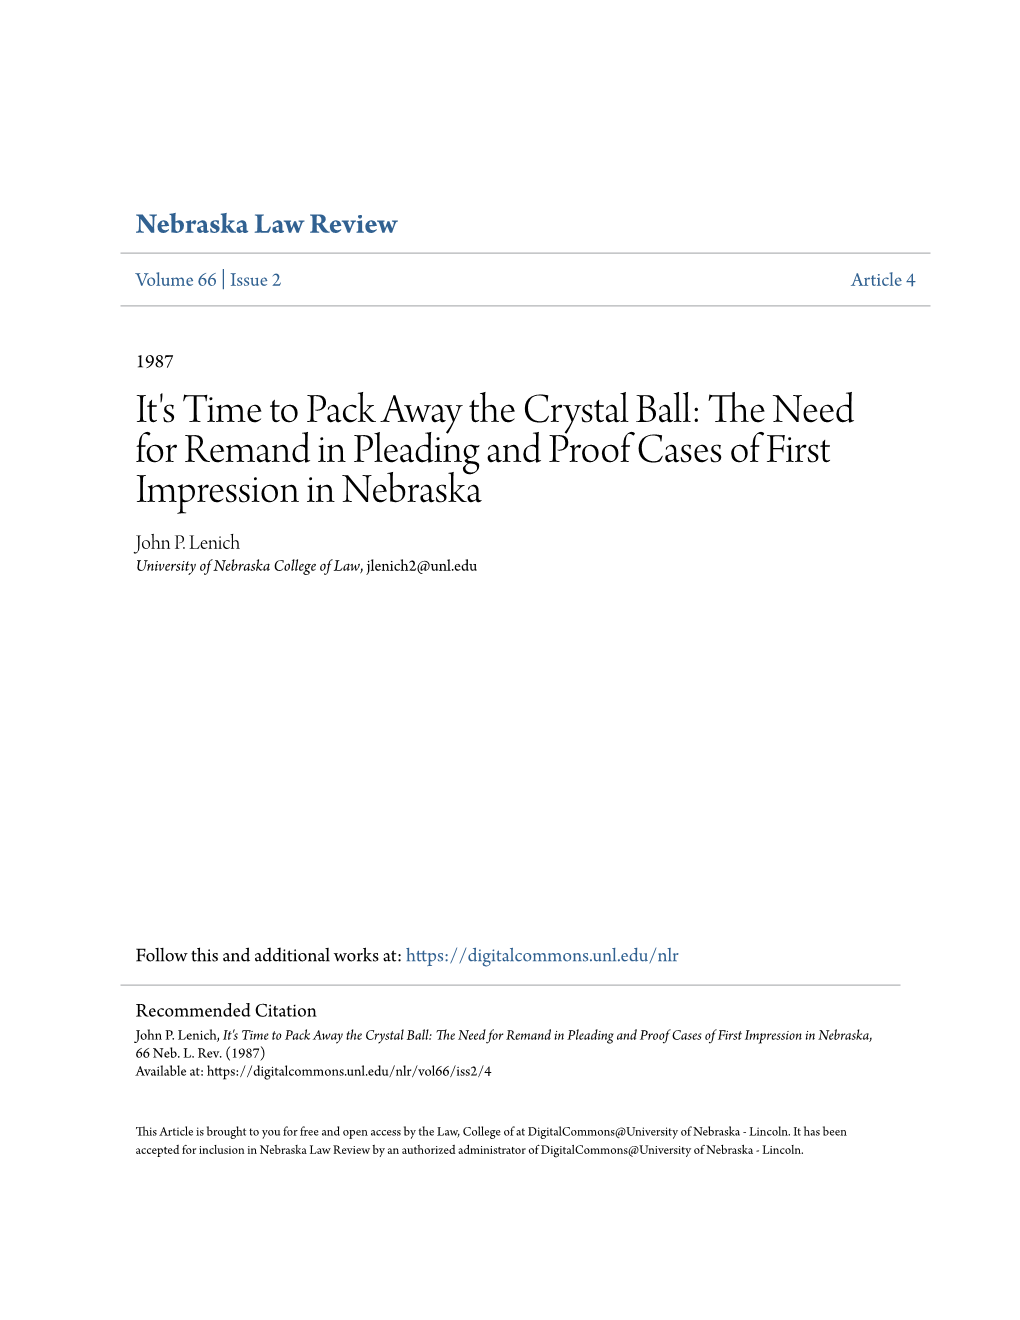 The Need for Remand in Pleading and Proof Cases of First Impression in Nebraska, 66 Neb